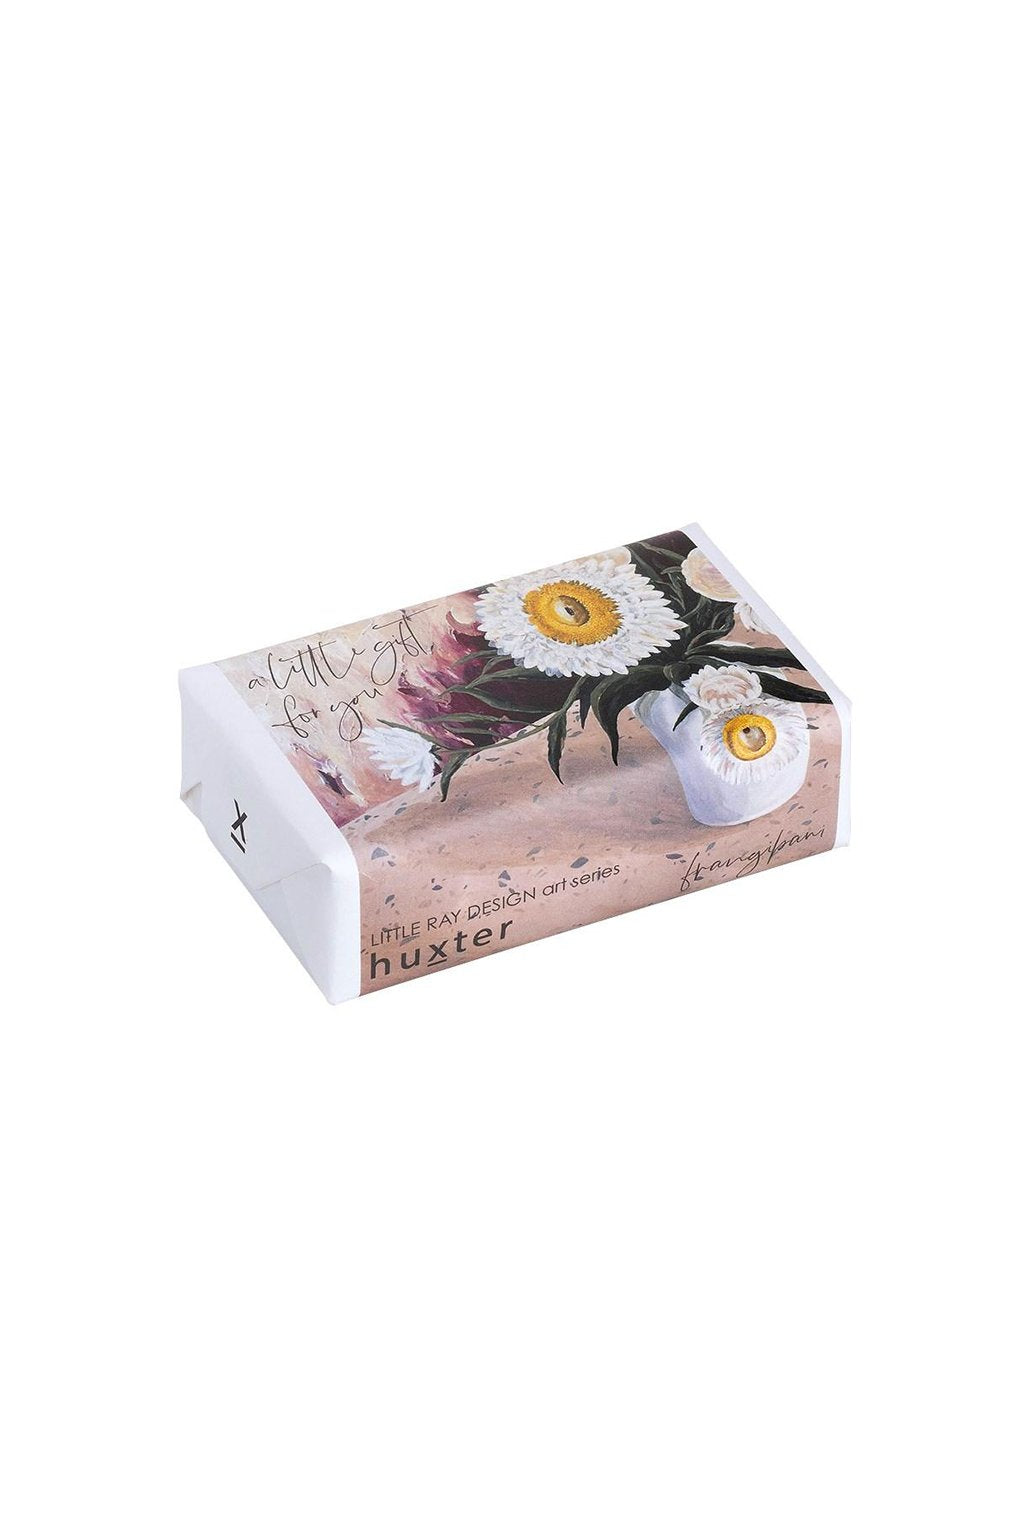 Huxter-Huxter Soap - 'Everlasting' - A little gift for you-Mott and Mulberry